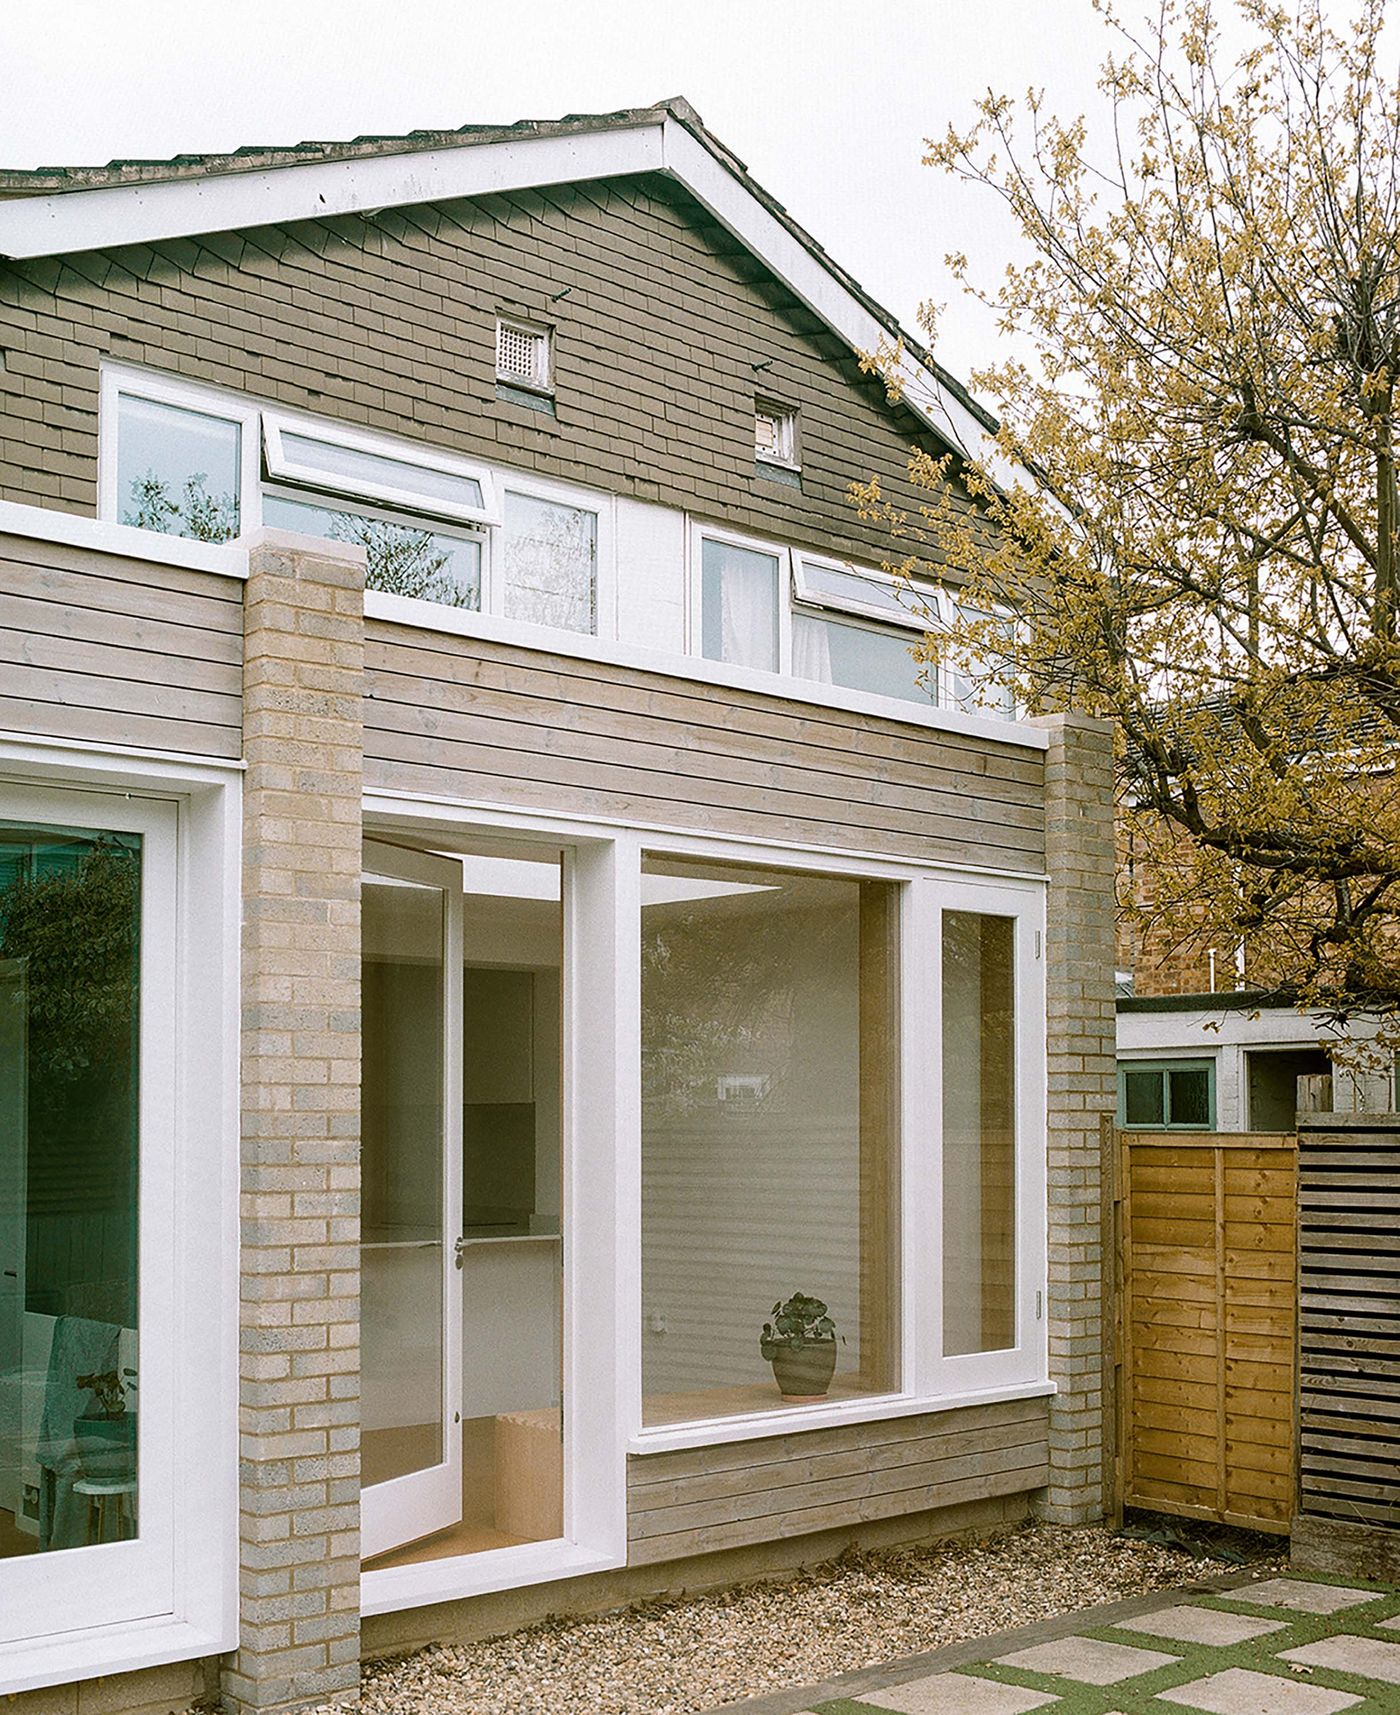 External view of the new rear extension at Dorville Road project designed by From Works.